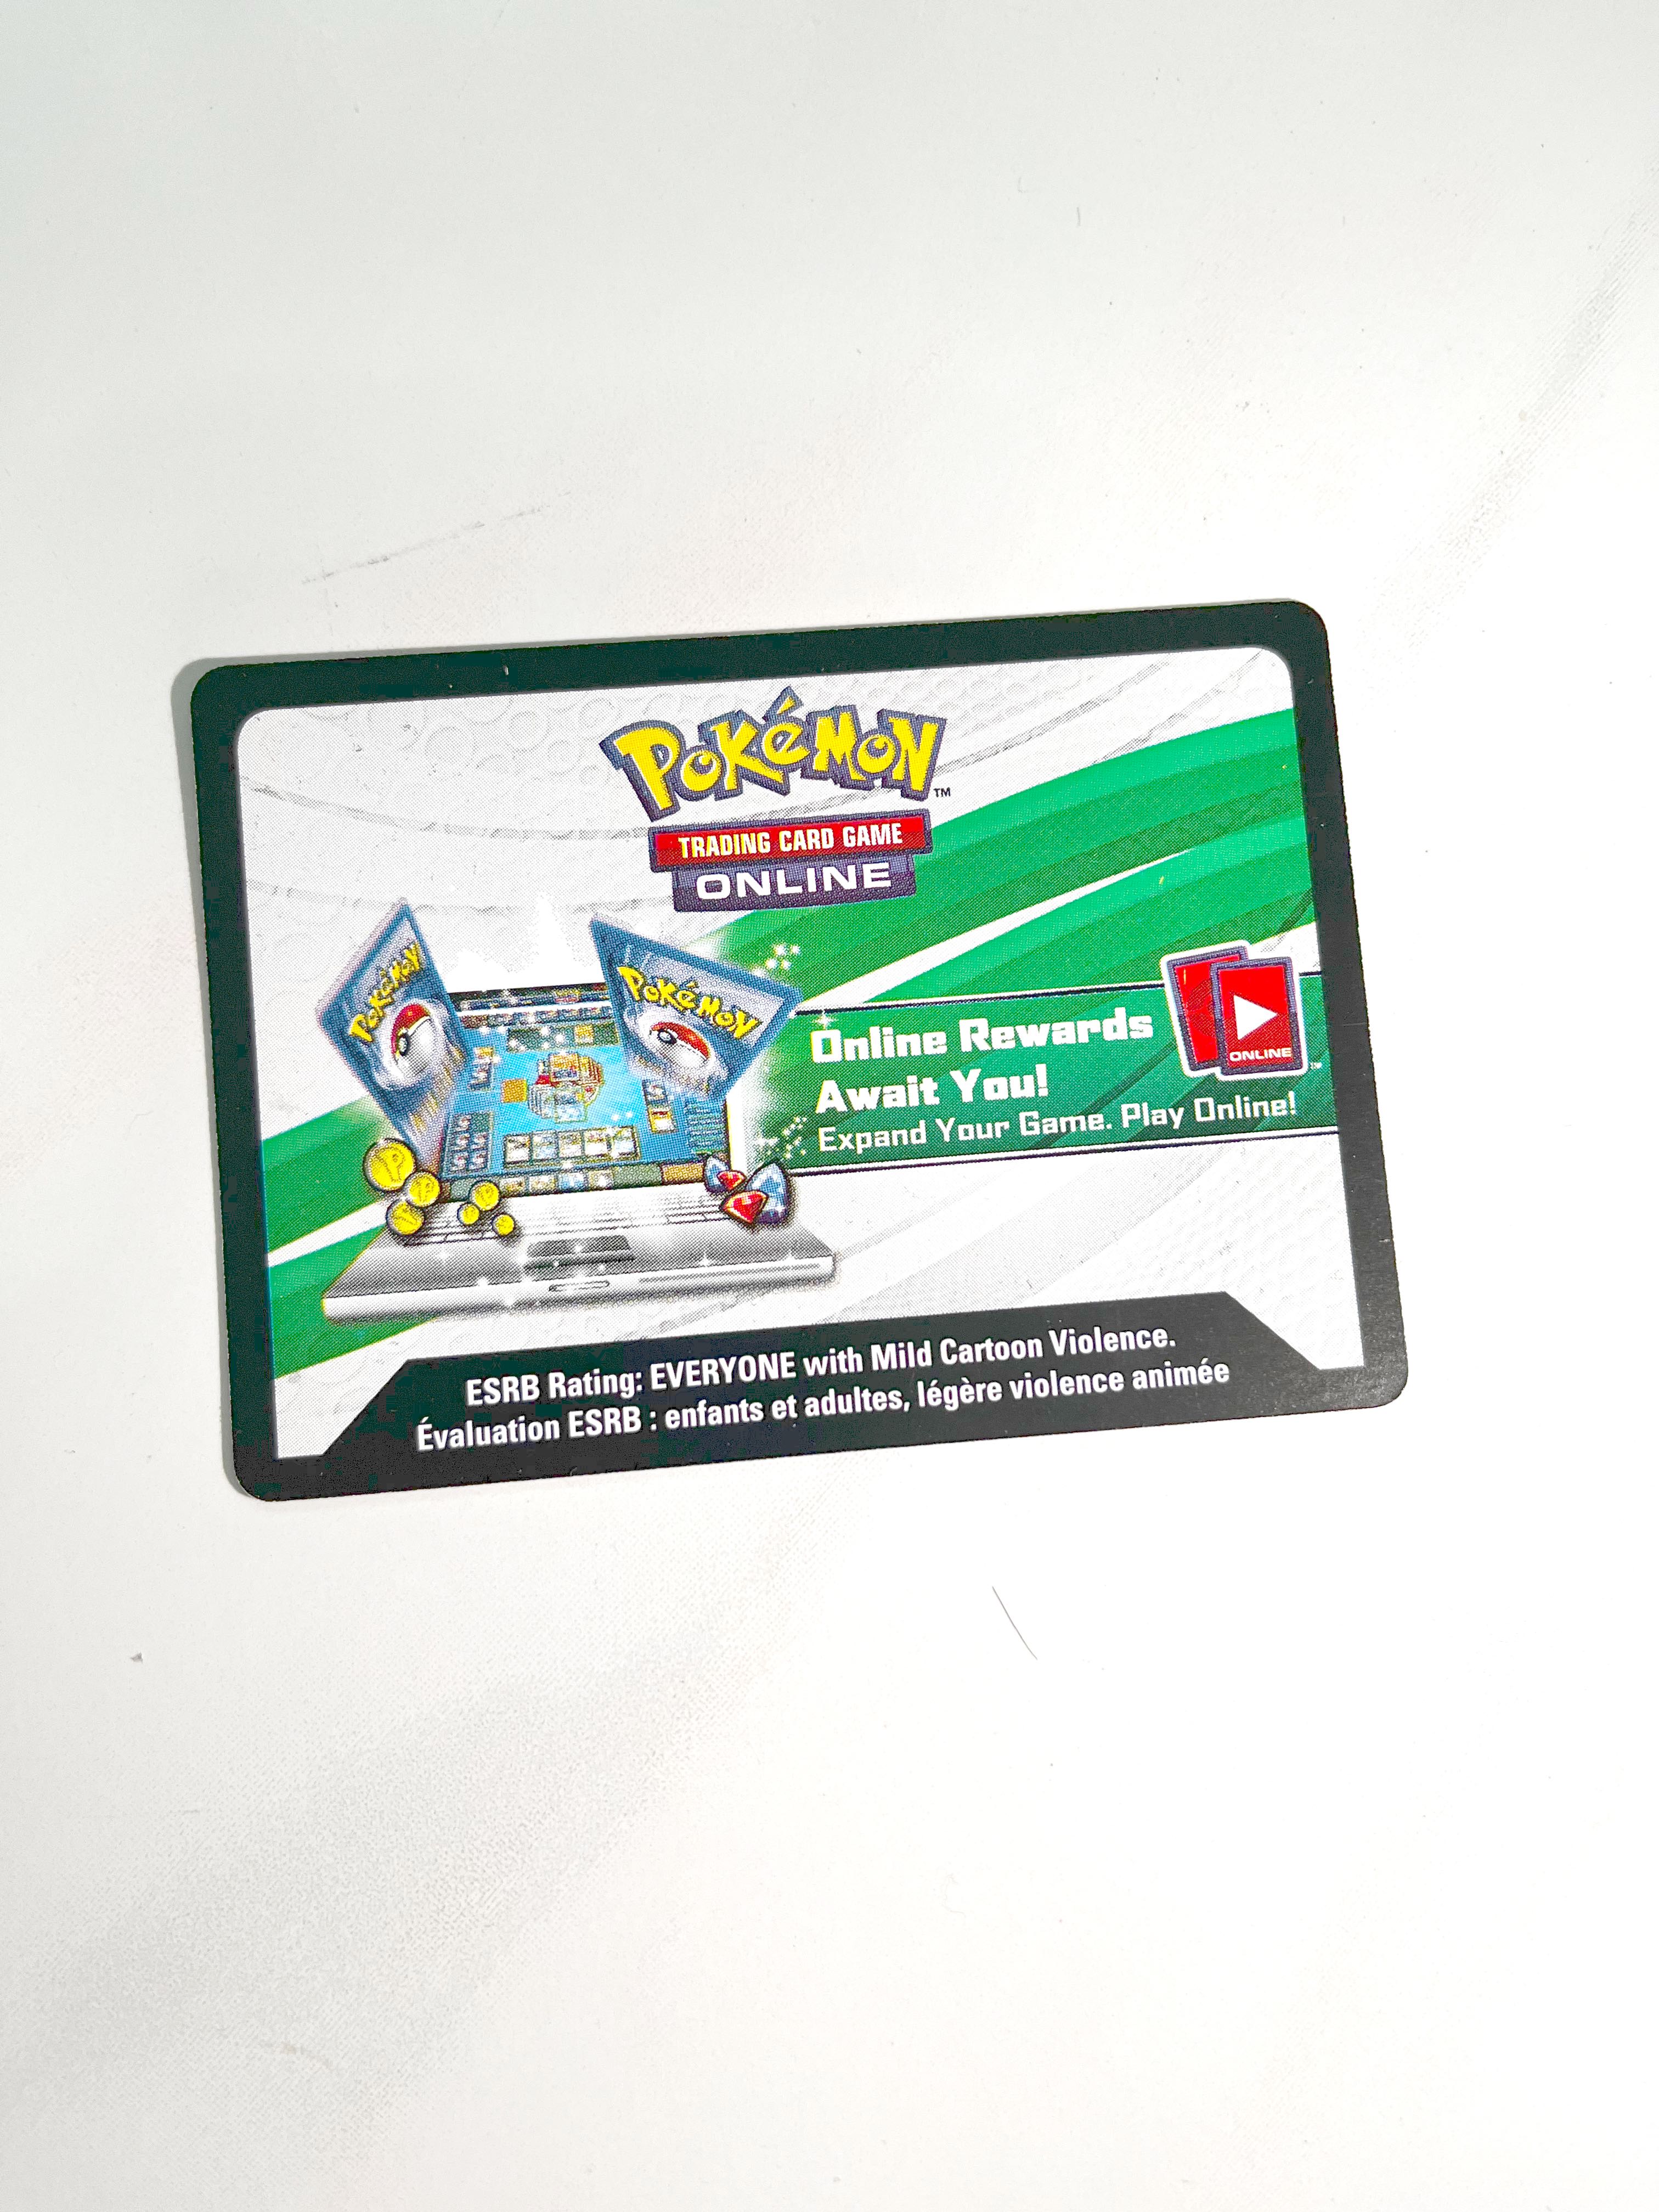 Trading Card Game Online Code Card 4x Pokemon Champion's Path INSTANT Email 